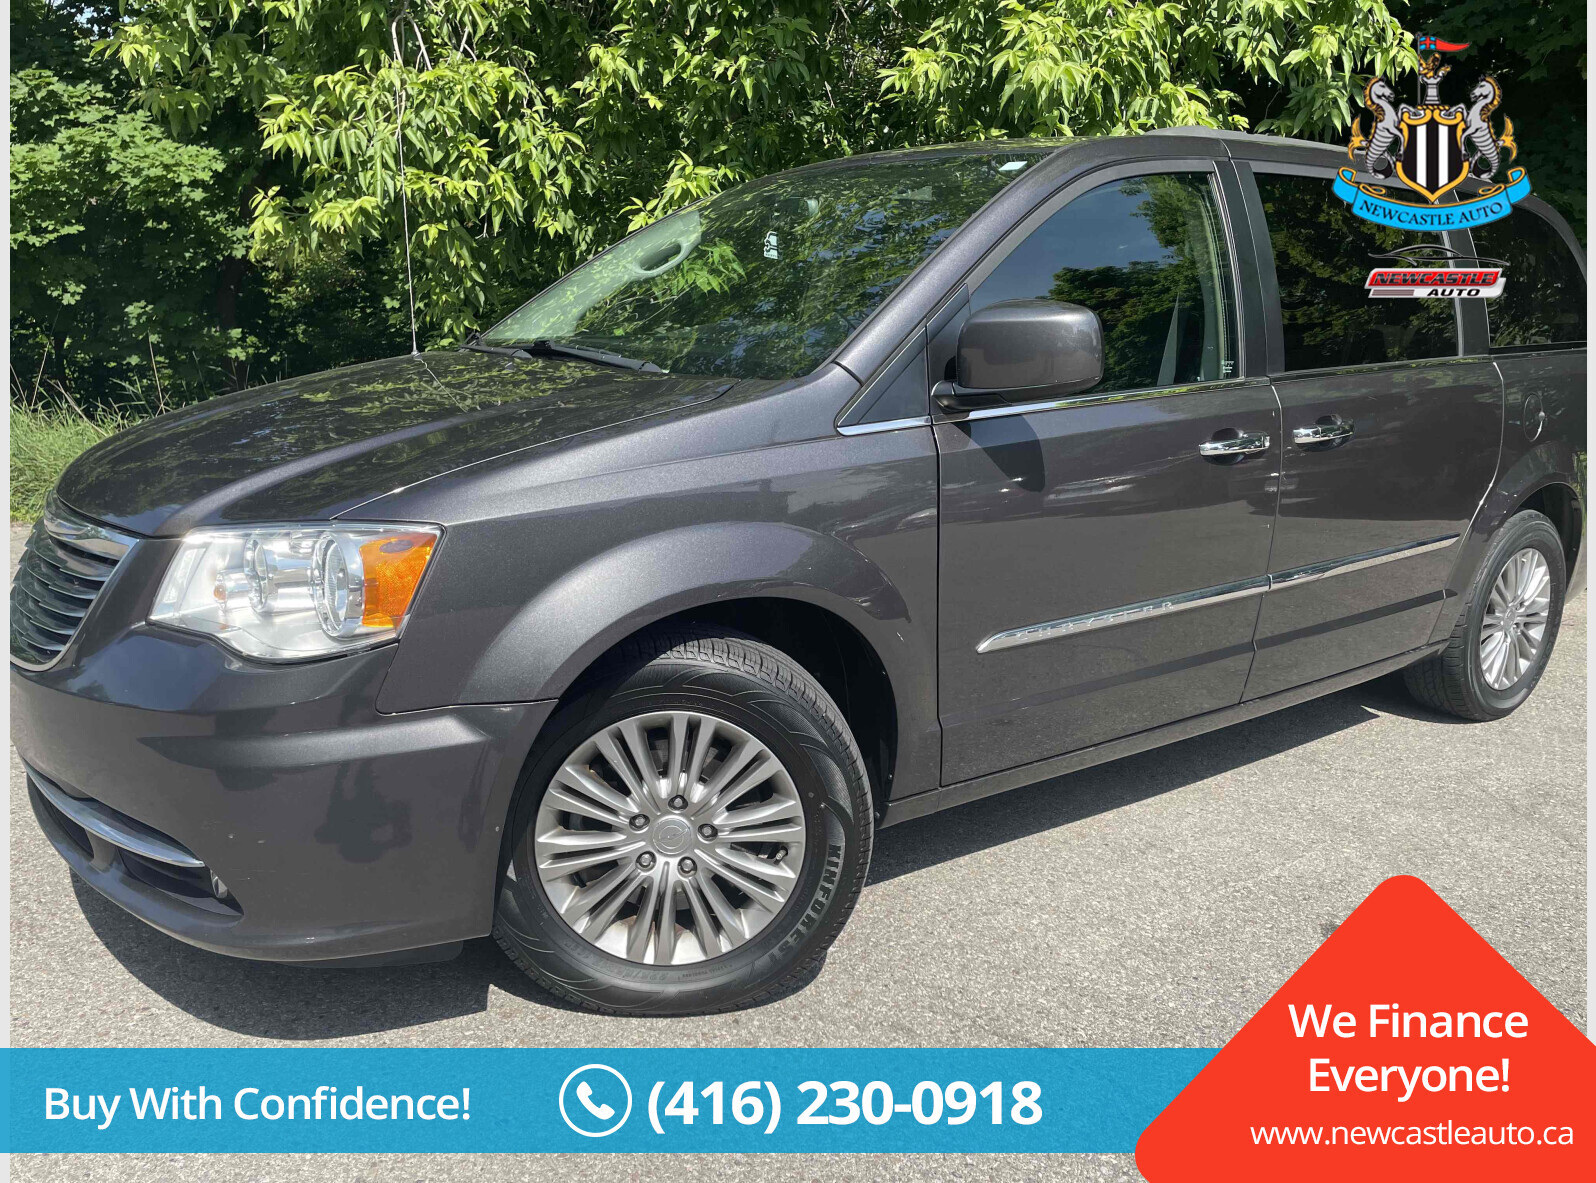 2015 Chrysler Town & Country 1 Year Warranty Included